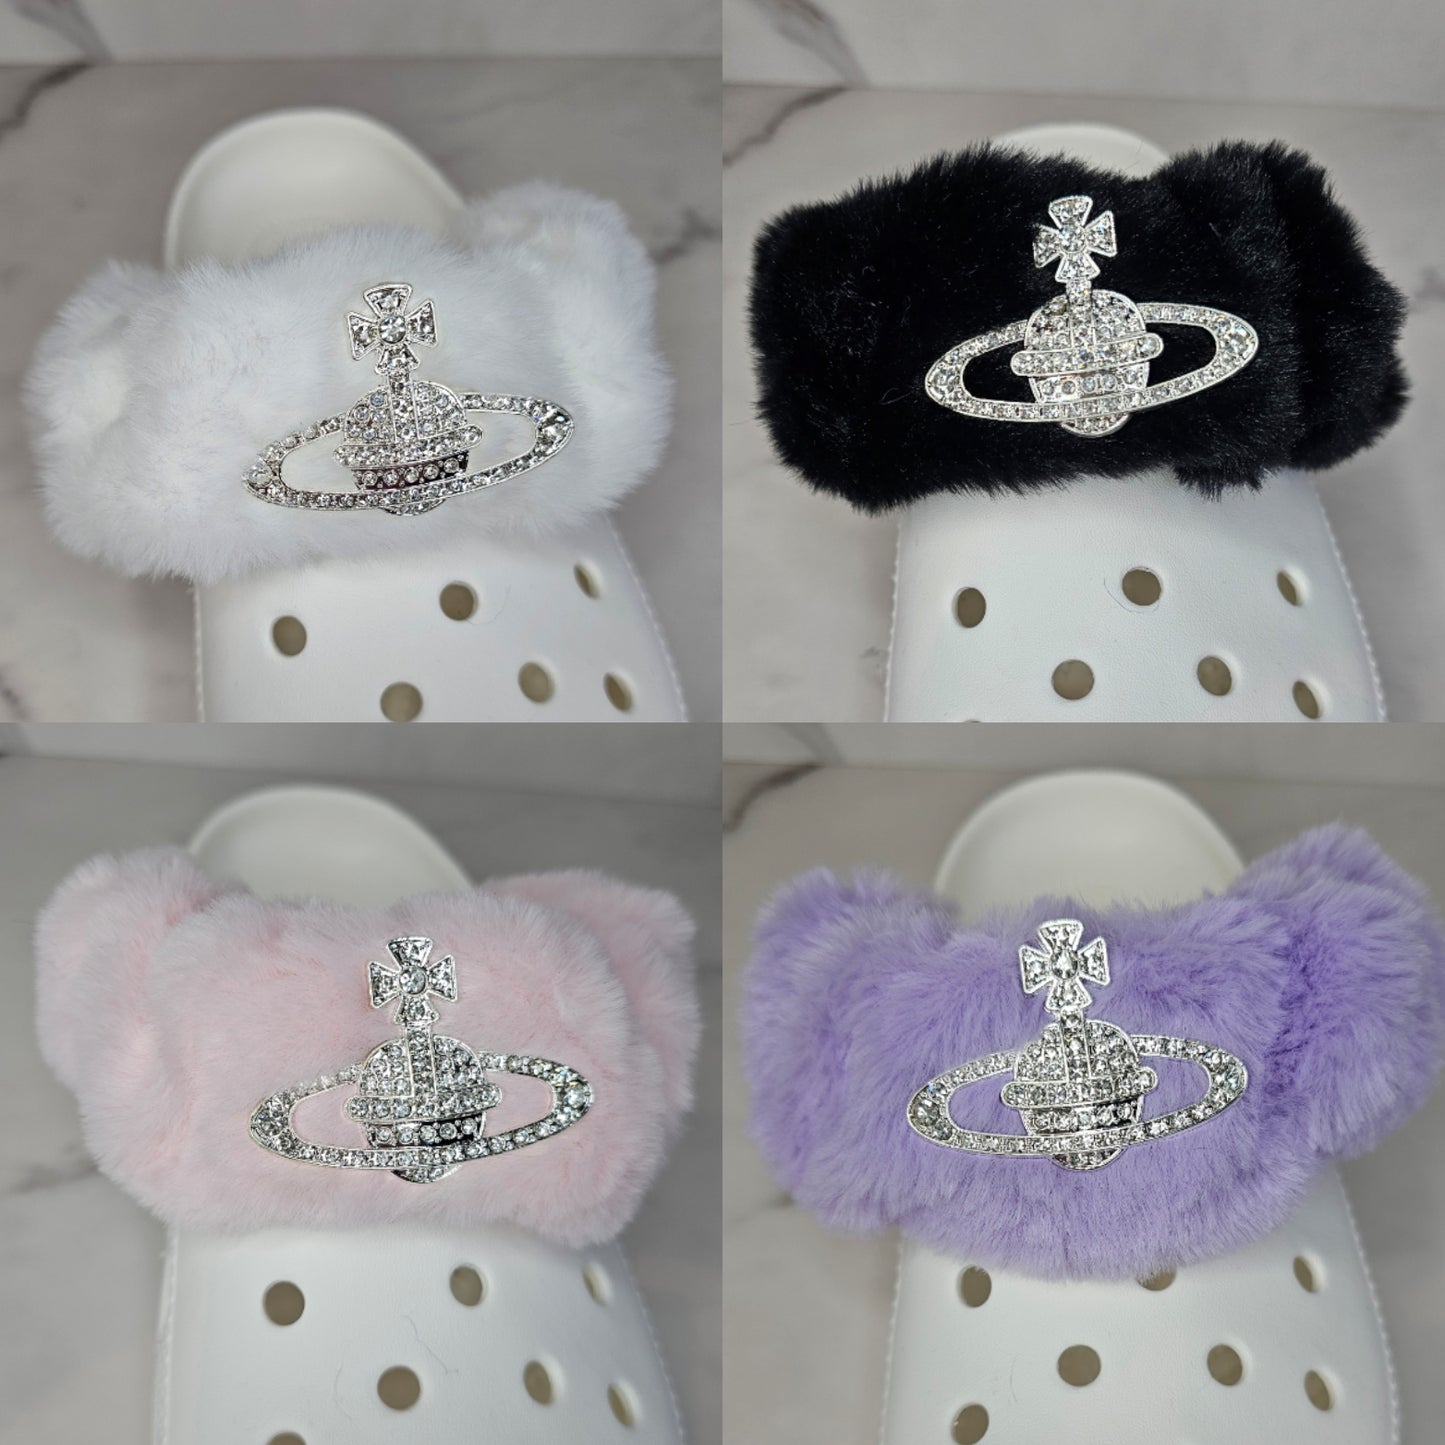 Fluffy vivian croc strap covers, come in pairs!